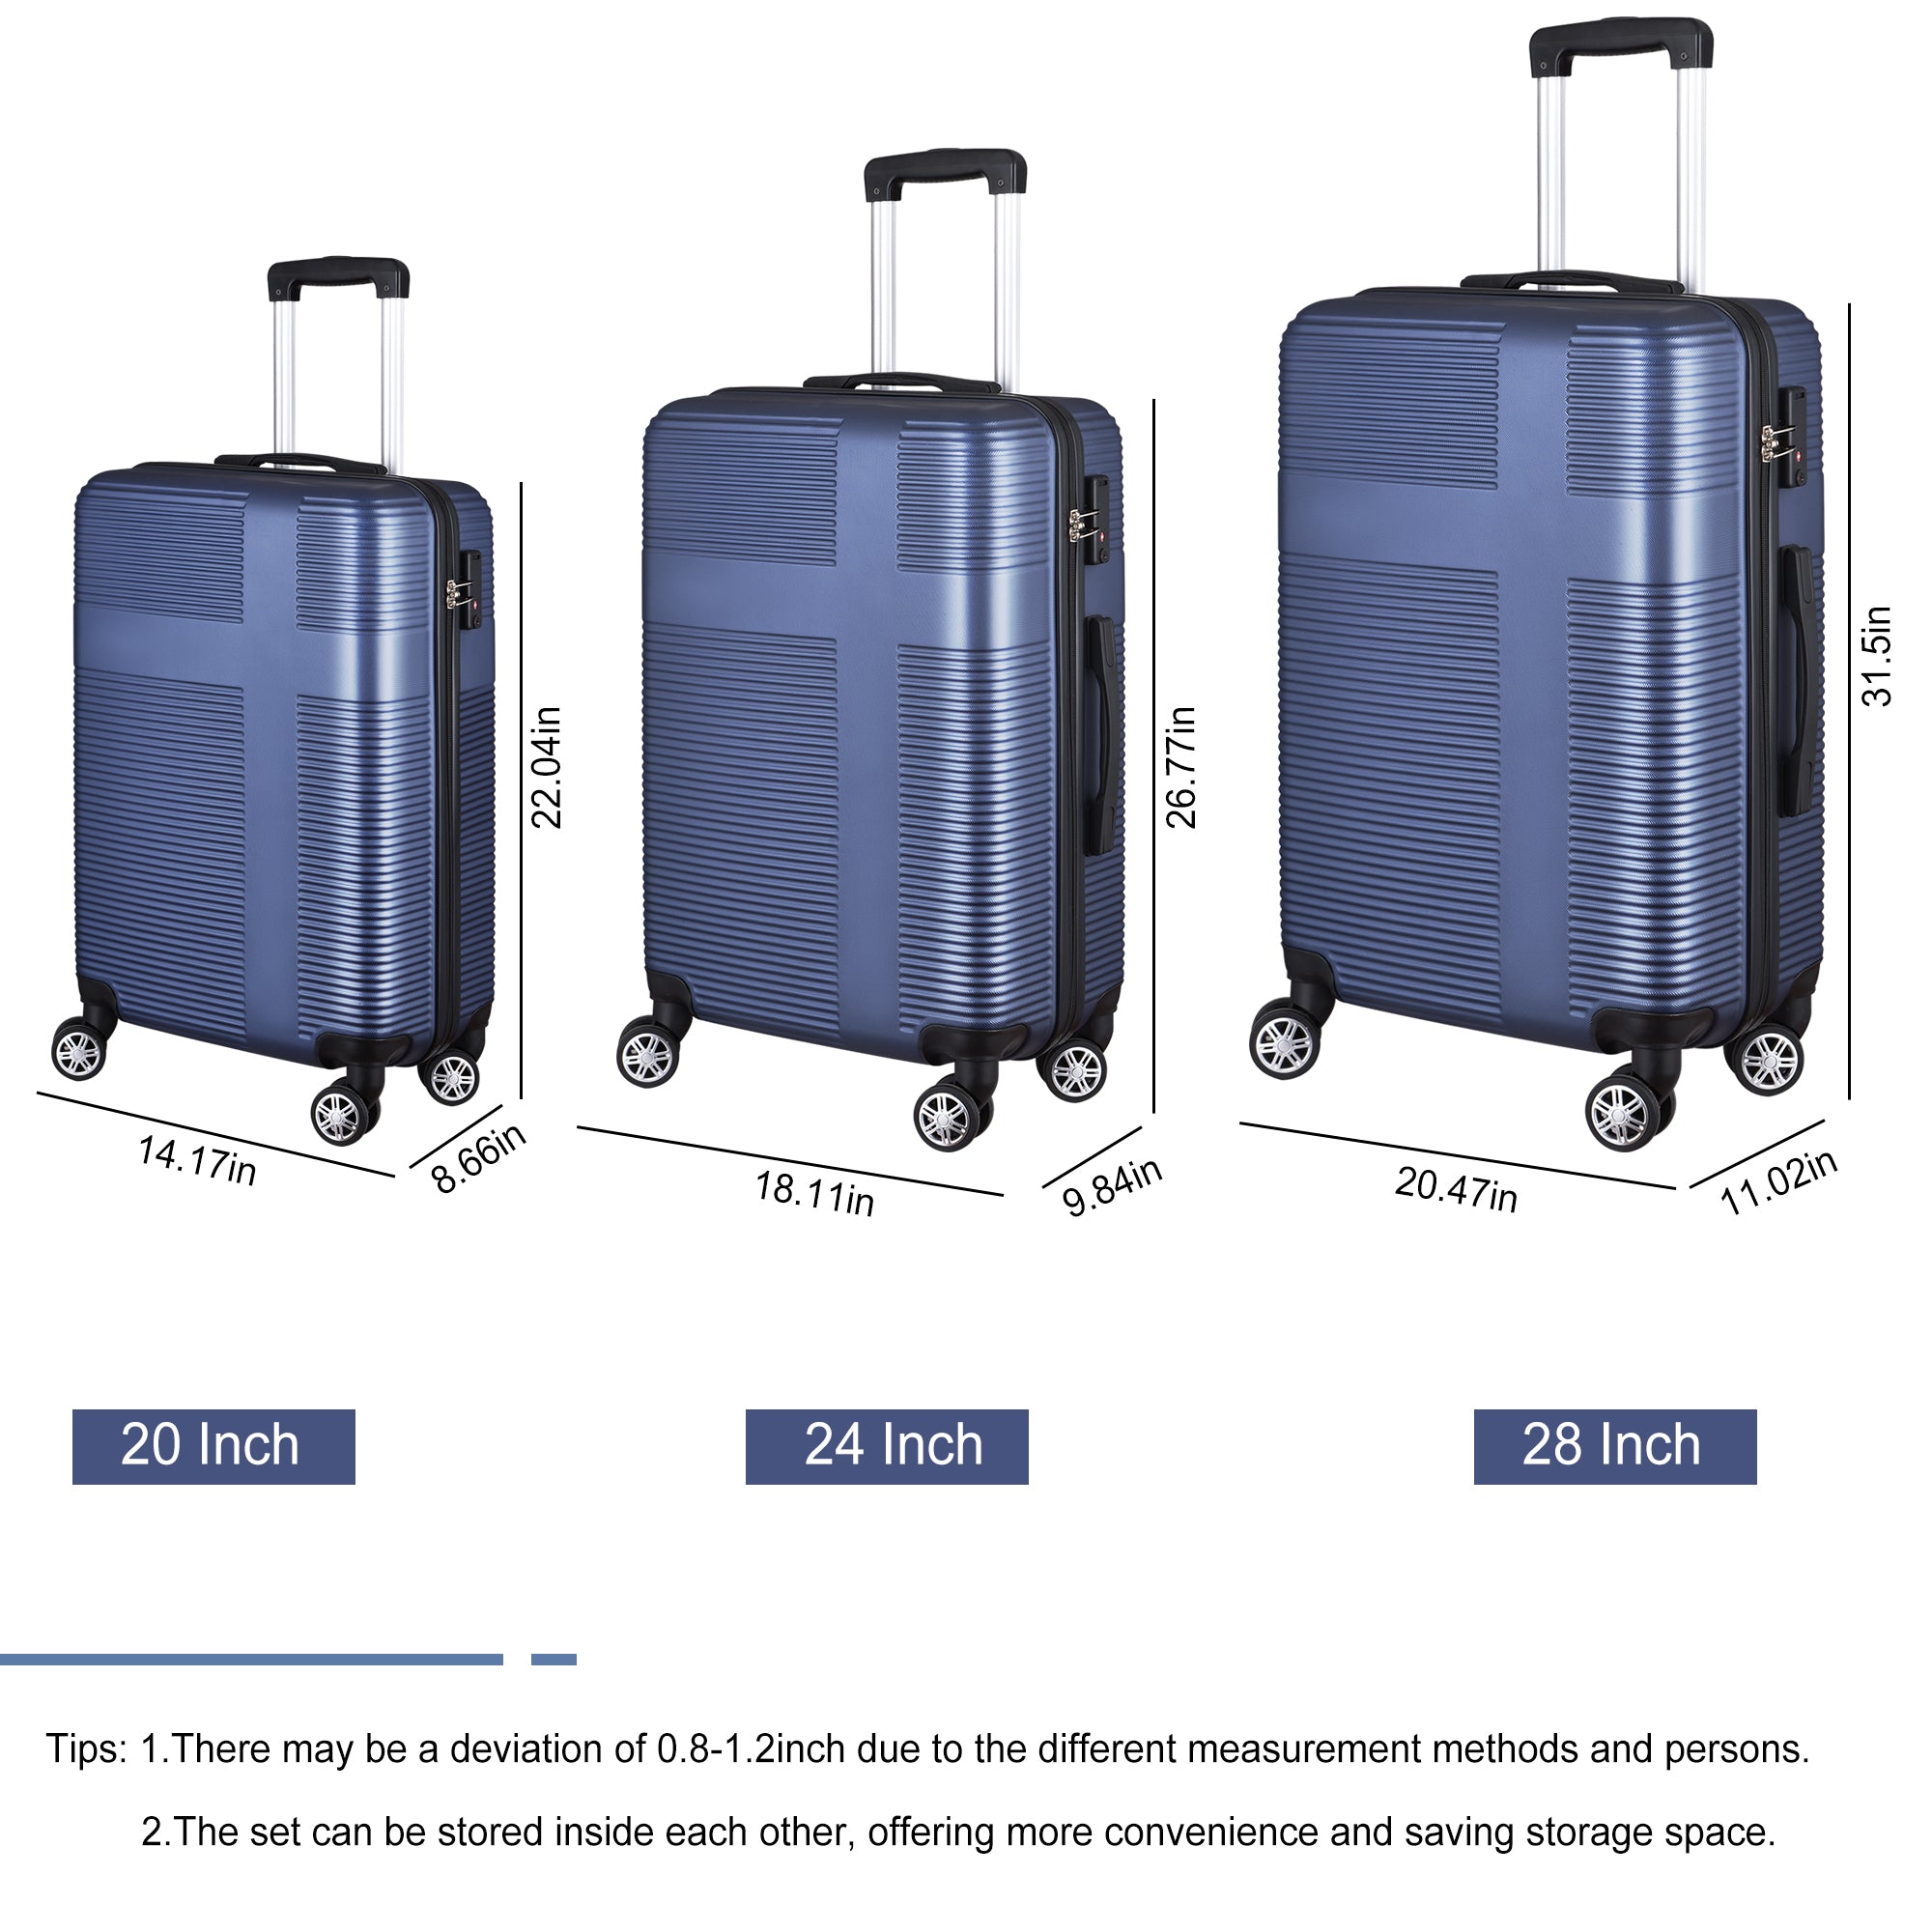 ZNTS 3 Piece Luggage with TSA Lock ABS, Durable Luggage Set, Lightweight Suitcase with Hooks, Spinner W162573153